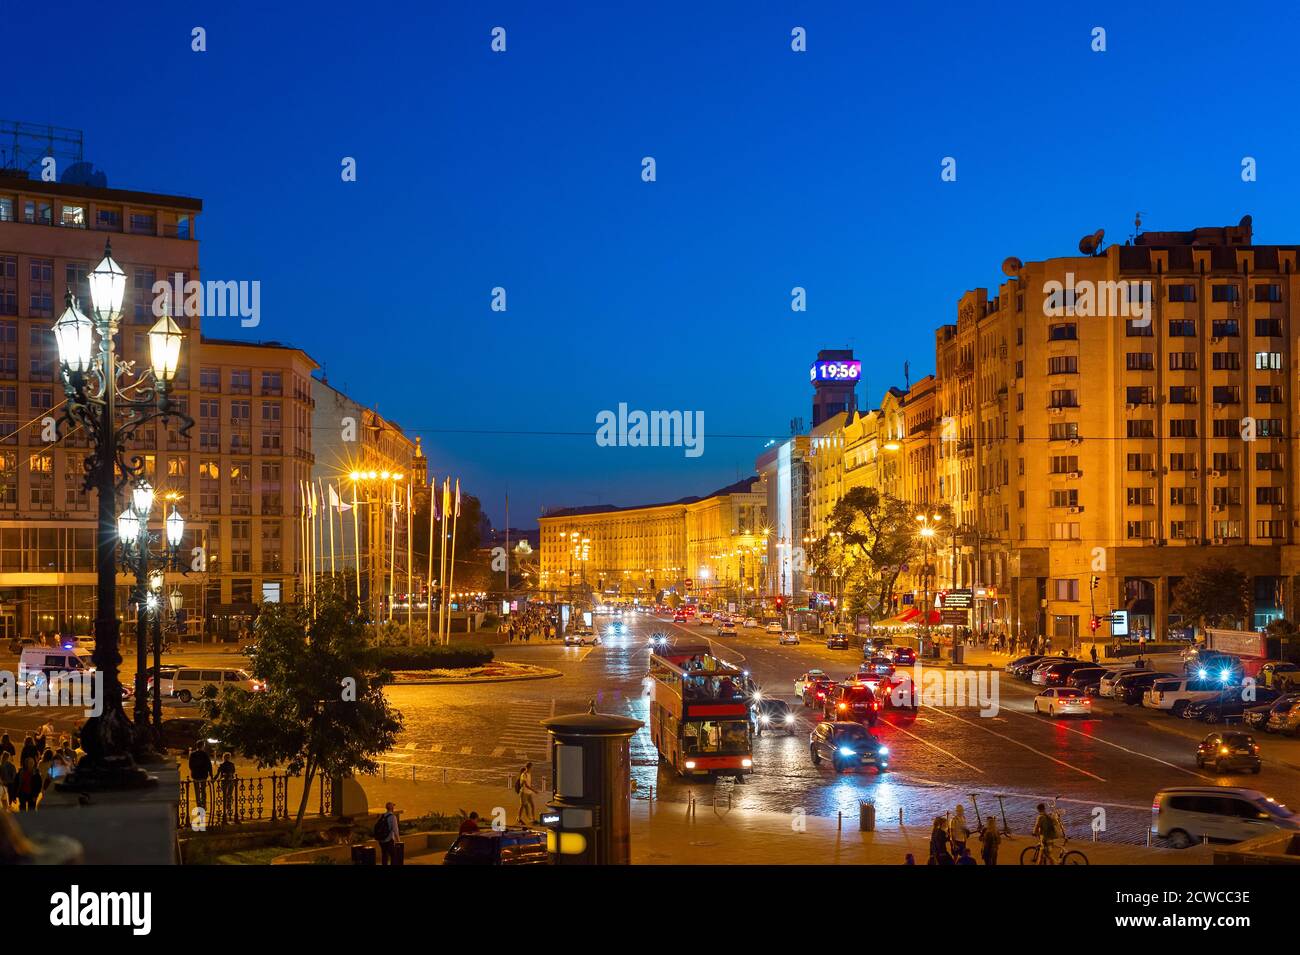 Twilight view of Khreschatyk street and European square. Khreschatyk is the central street of Kyiv - the capital of Ukraine. Stock Photo